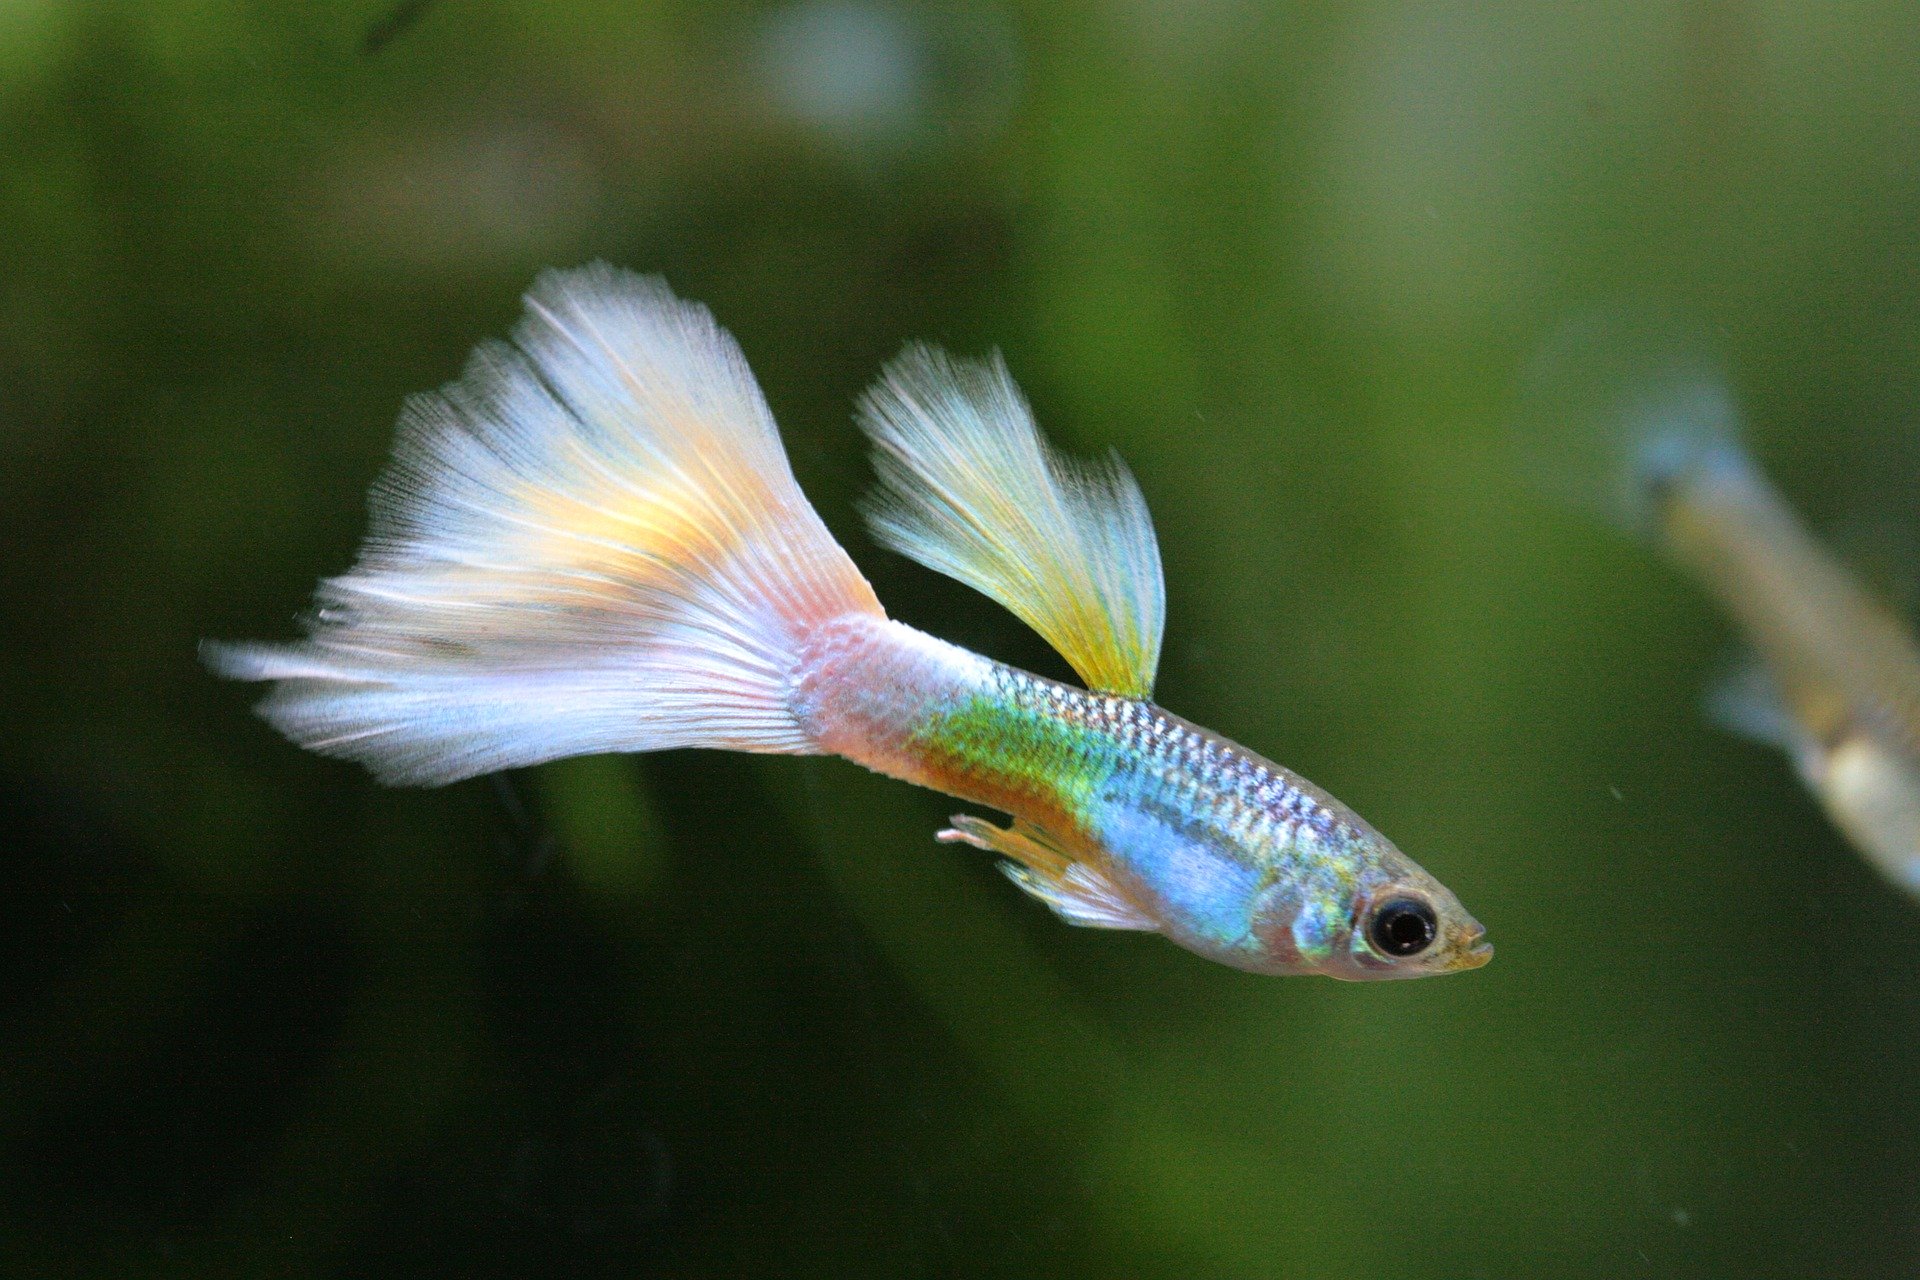 Why Is Guppies The Perfect Pet So Famous?